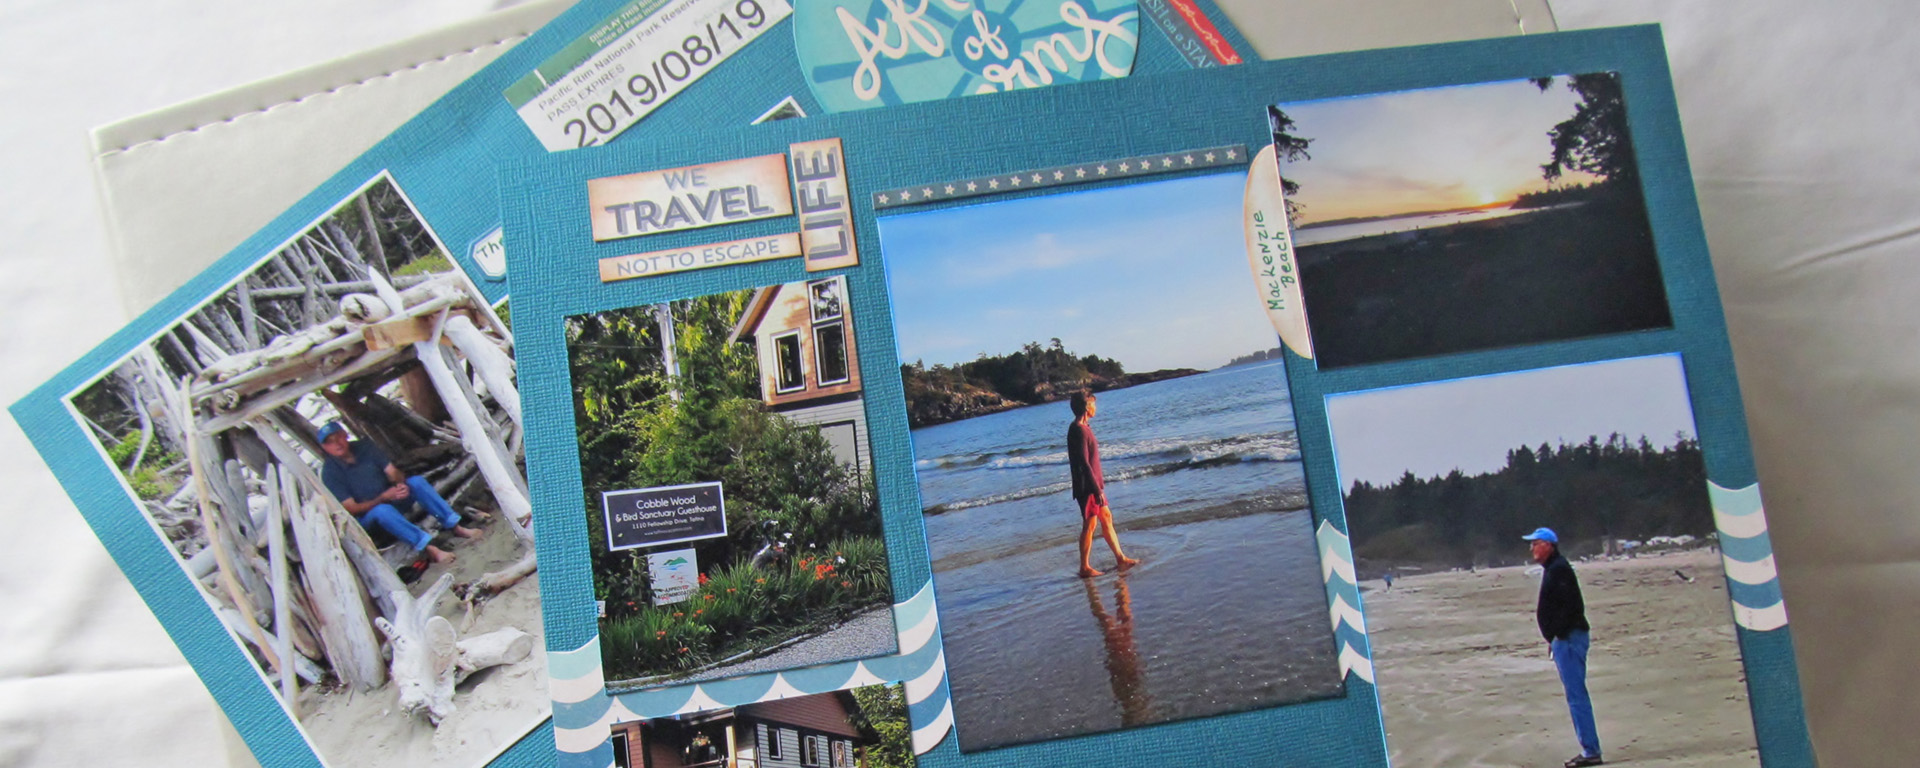 A picture of scrapbook pages done in blue tones. There’s several photos on the pages, showing people walking along a beach and visiting a town, plus decorative word text. 